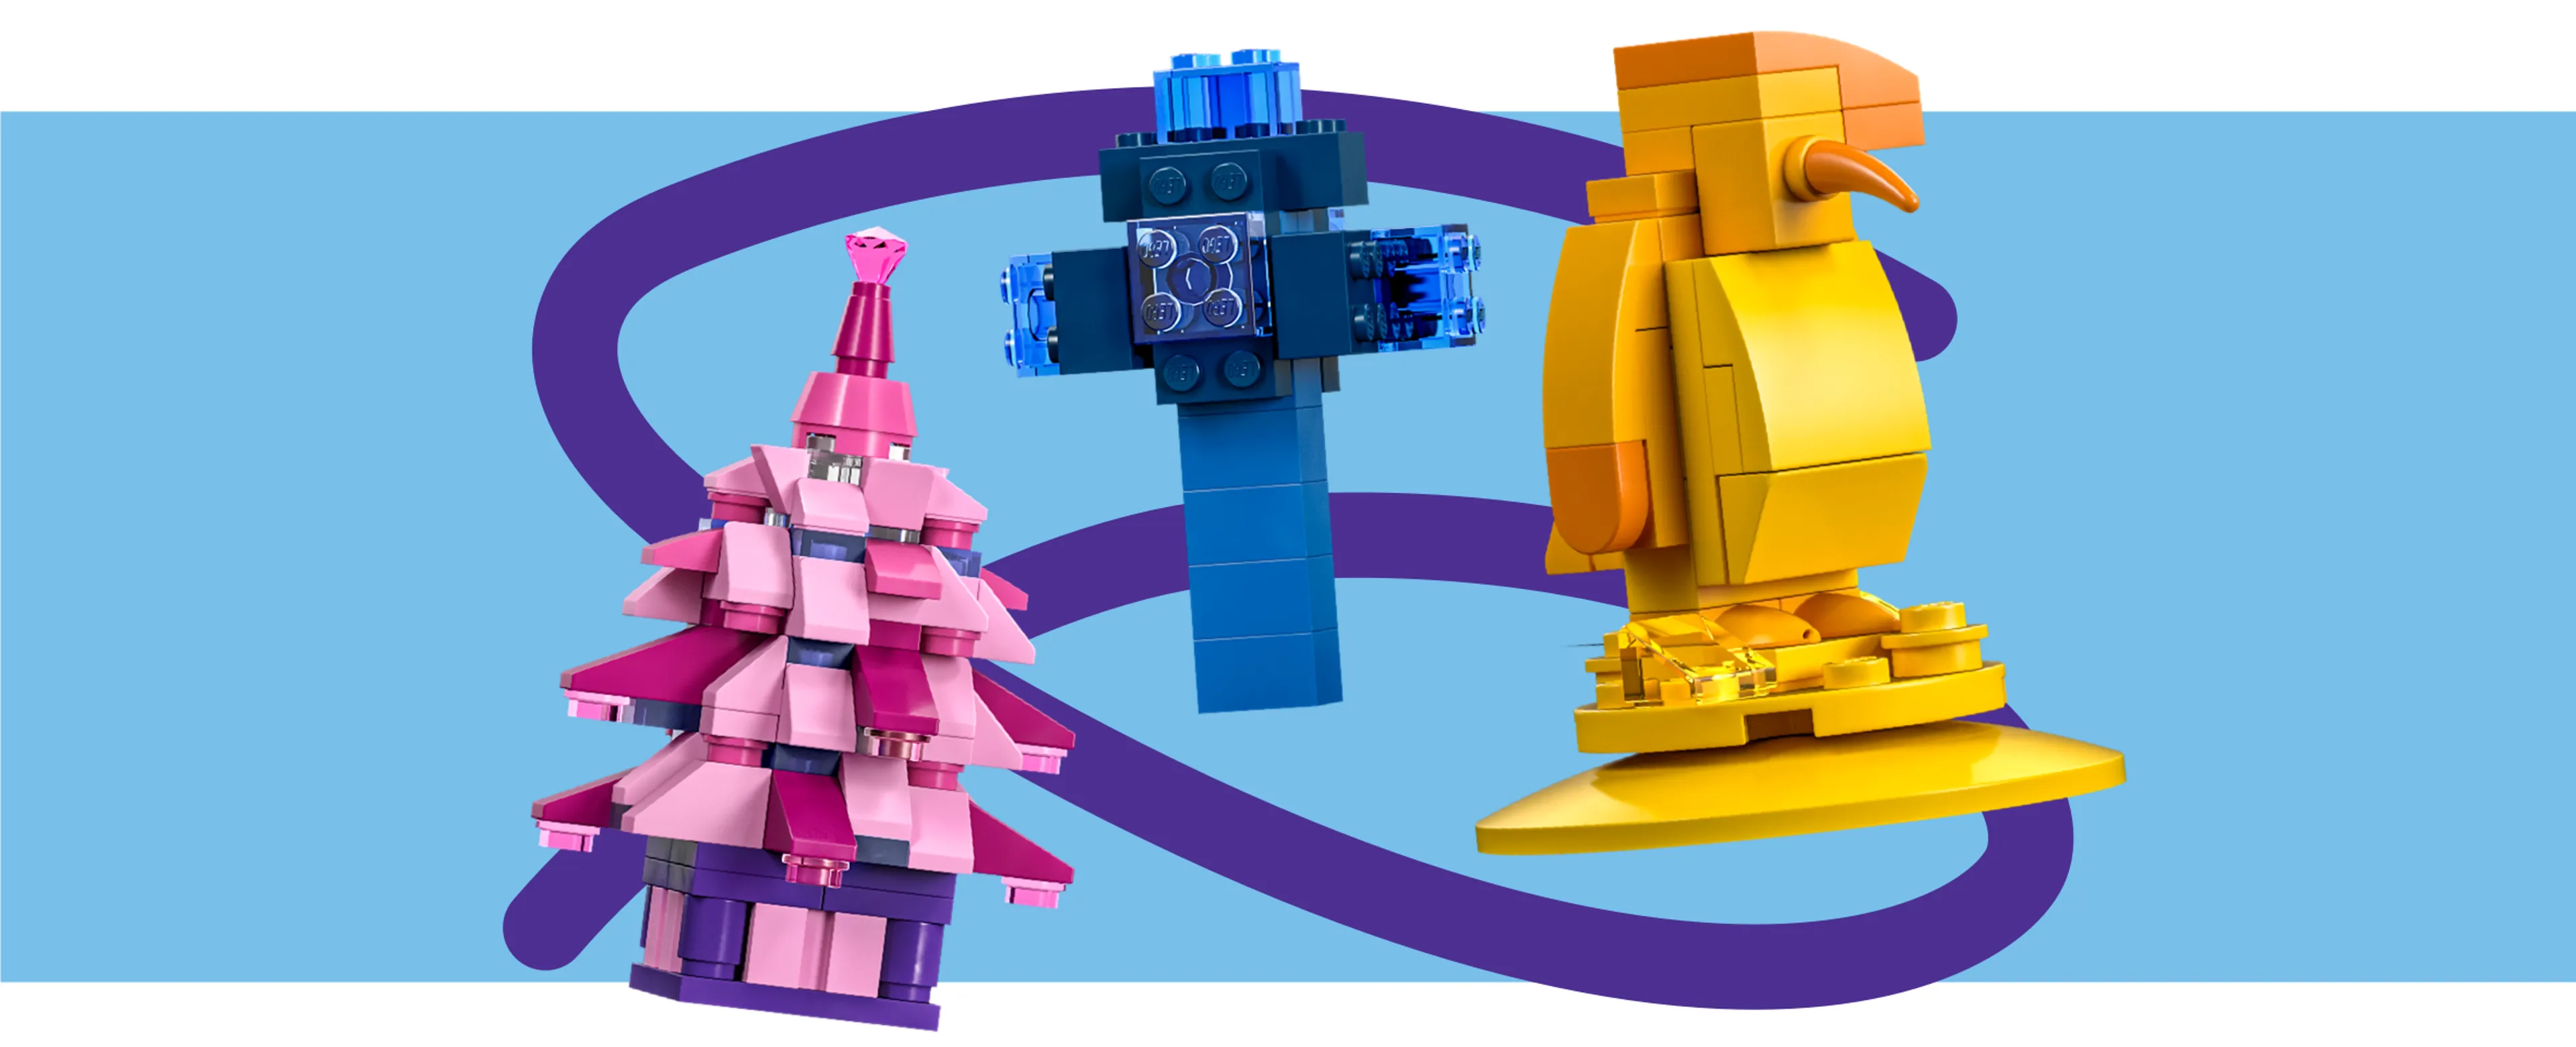 A selection of LEGO builds made from just one colour